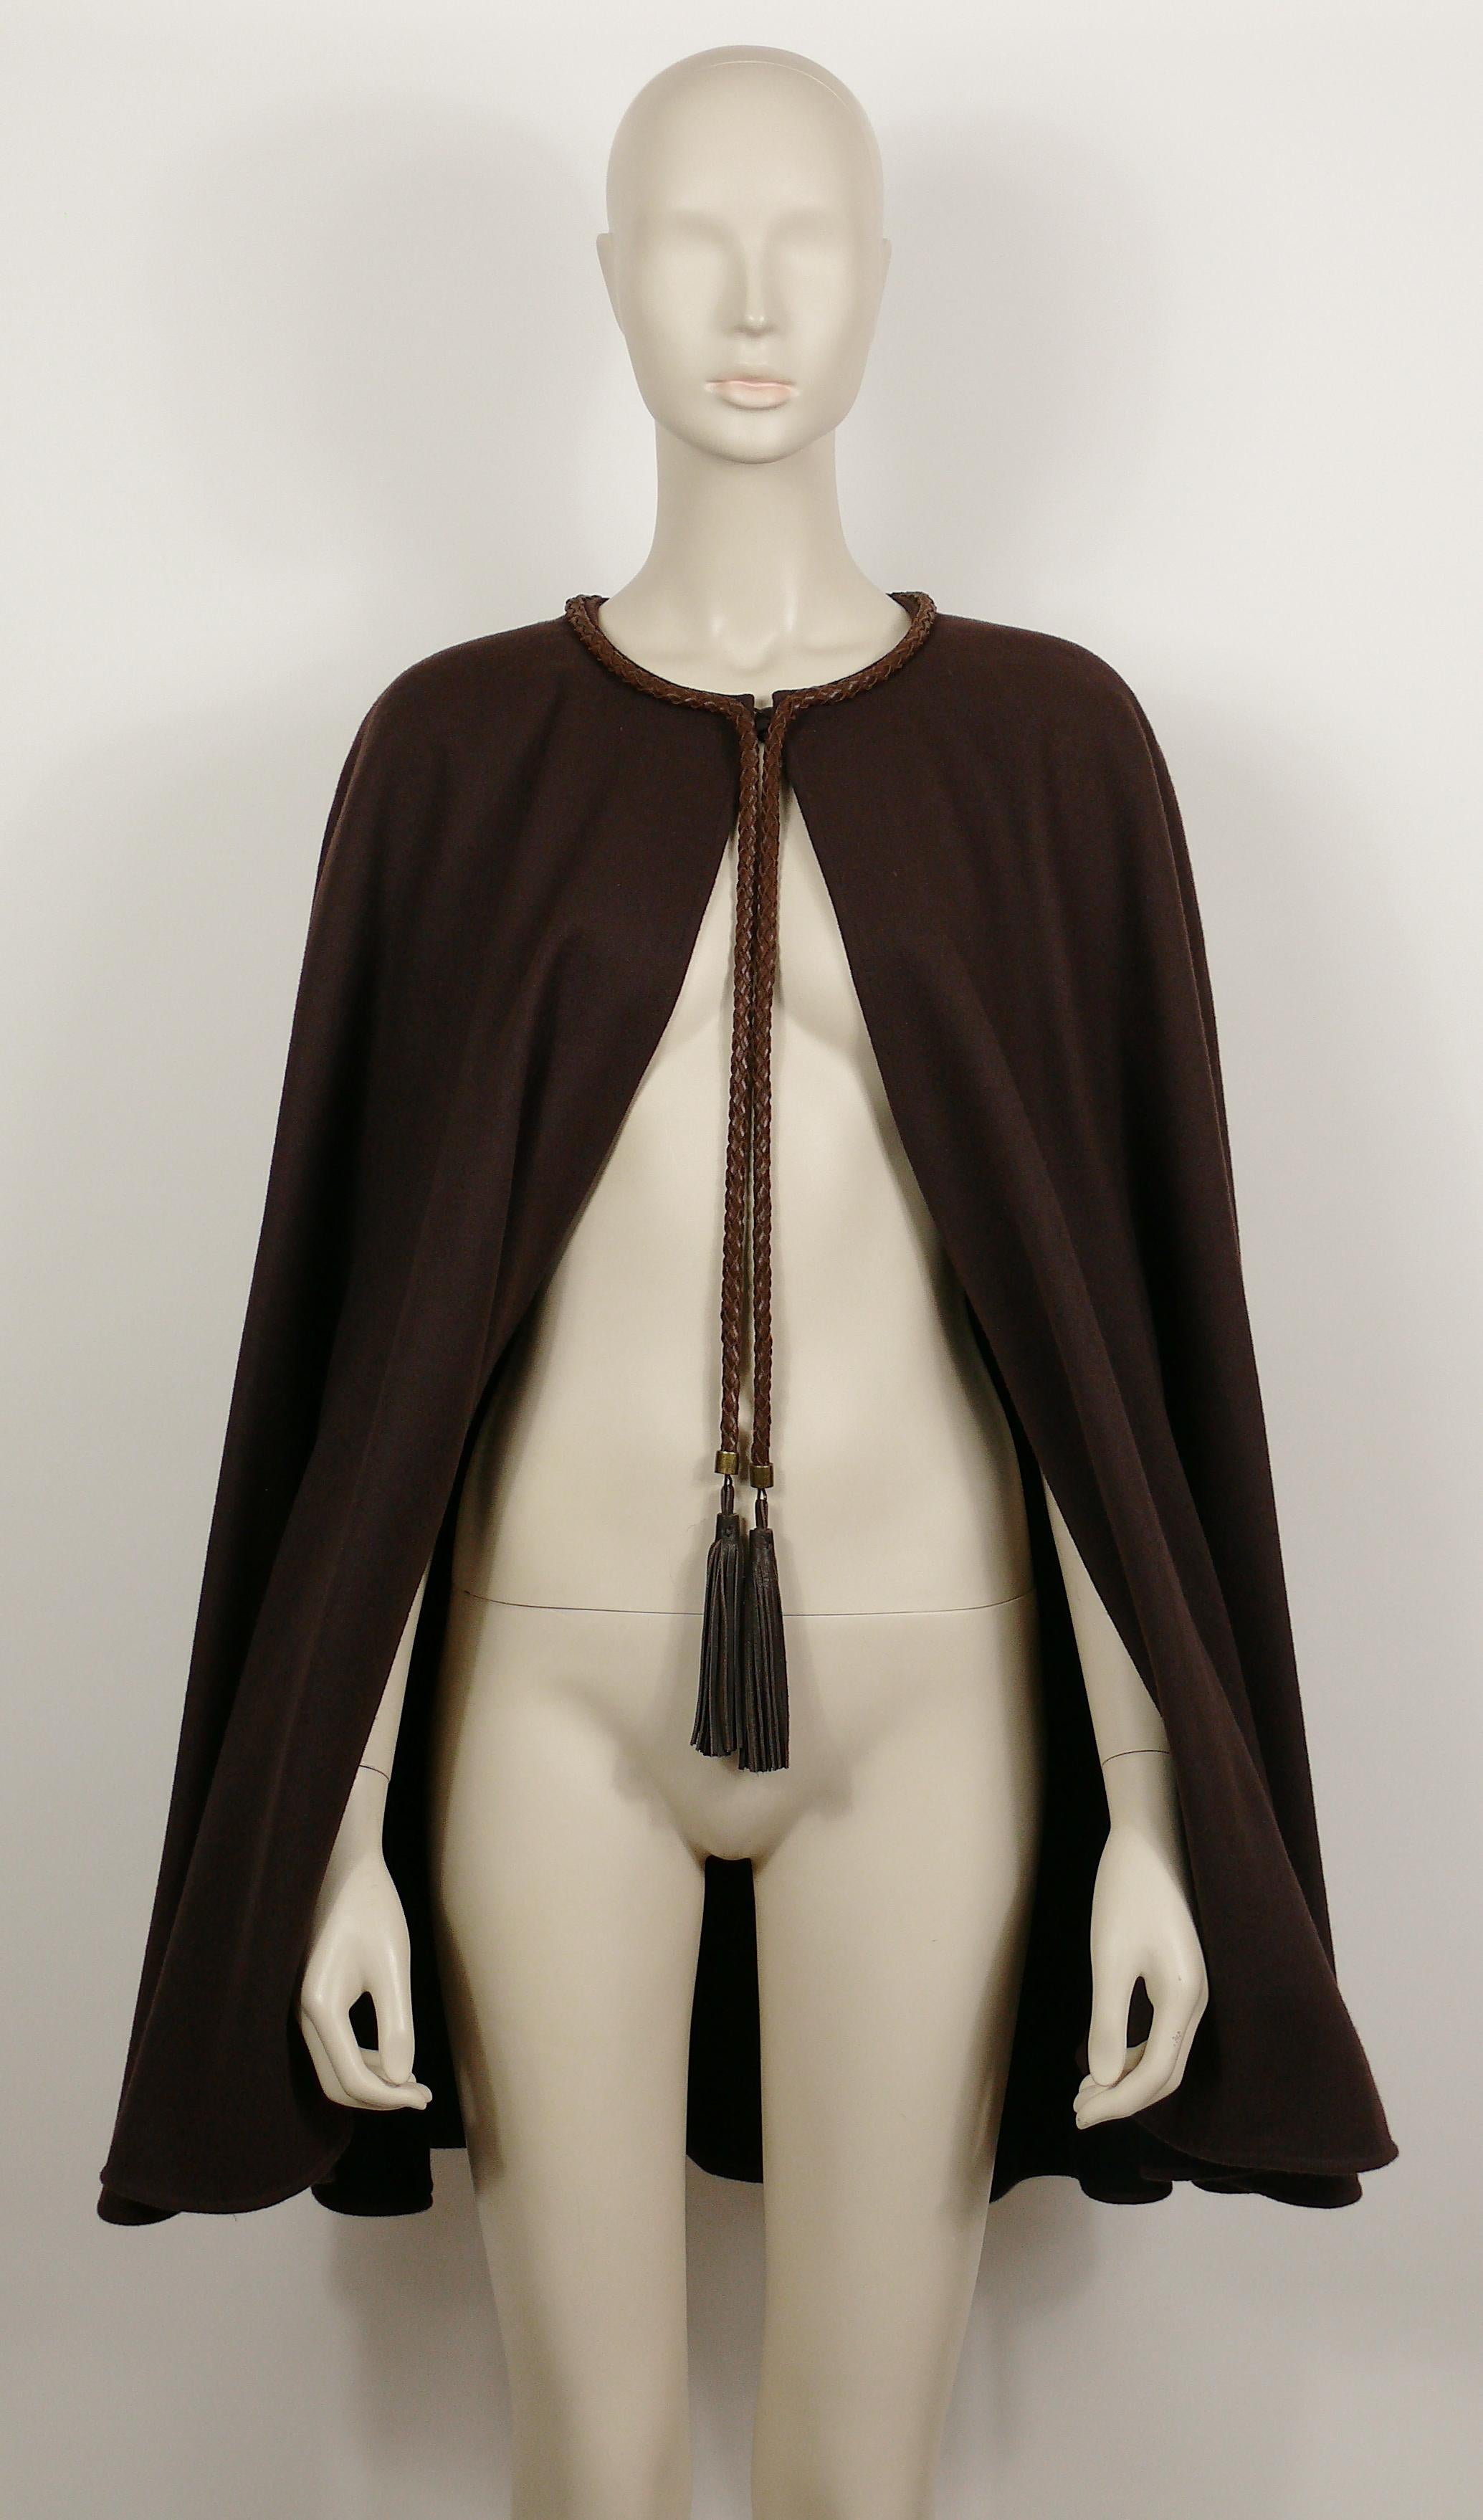 YVES SAINT LAURENT Rive Gauche vintage brown cape featuring leather tassels and breaded trim.

Single breast buttoning.
Antiqued bronze toned hardware.
Fully lined.

Label reads SAINT LAURENT Rive Gauche Paris.
Made in France.

Size tag reads :